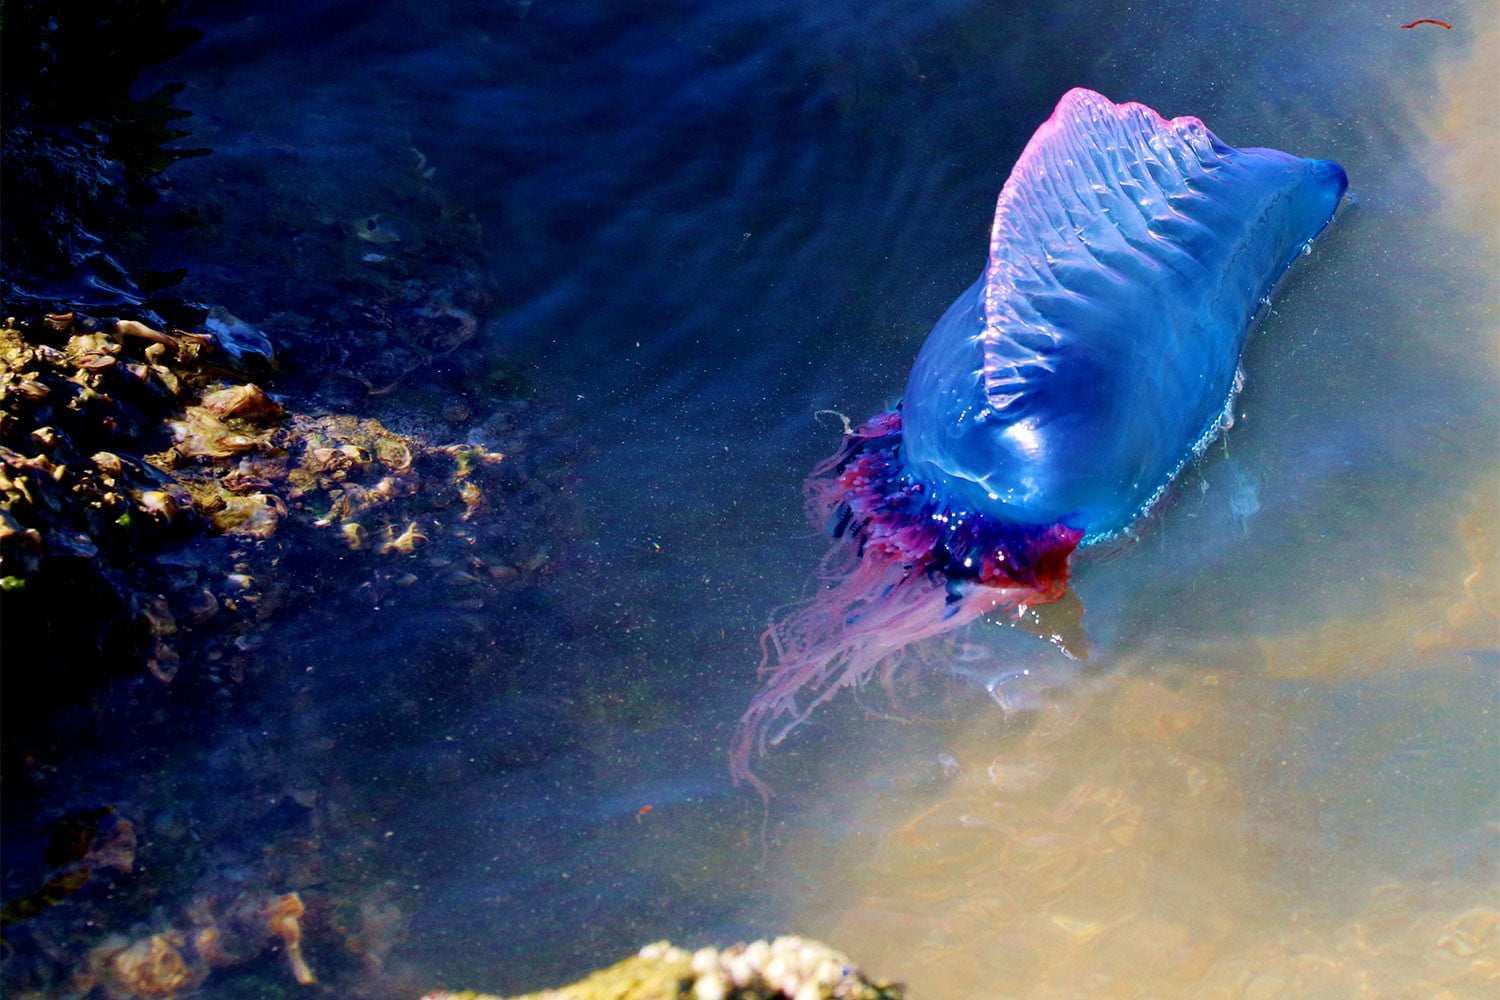 how did the portuguese man of war jellyfish get its name and how poisonous is its venom vs a cobra